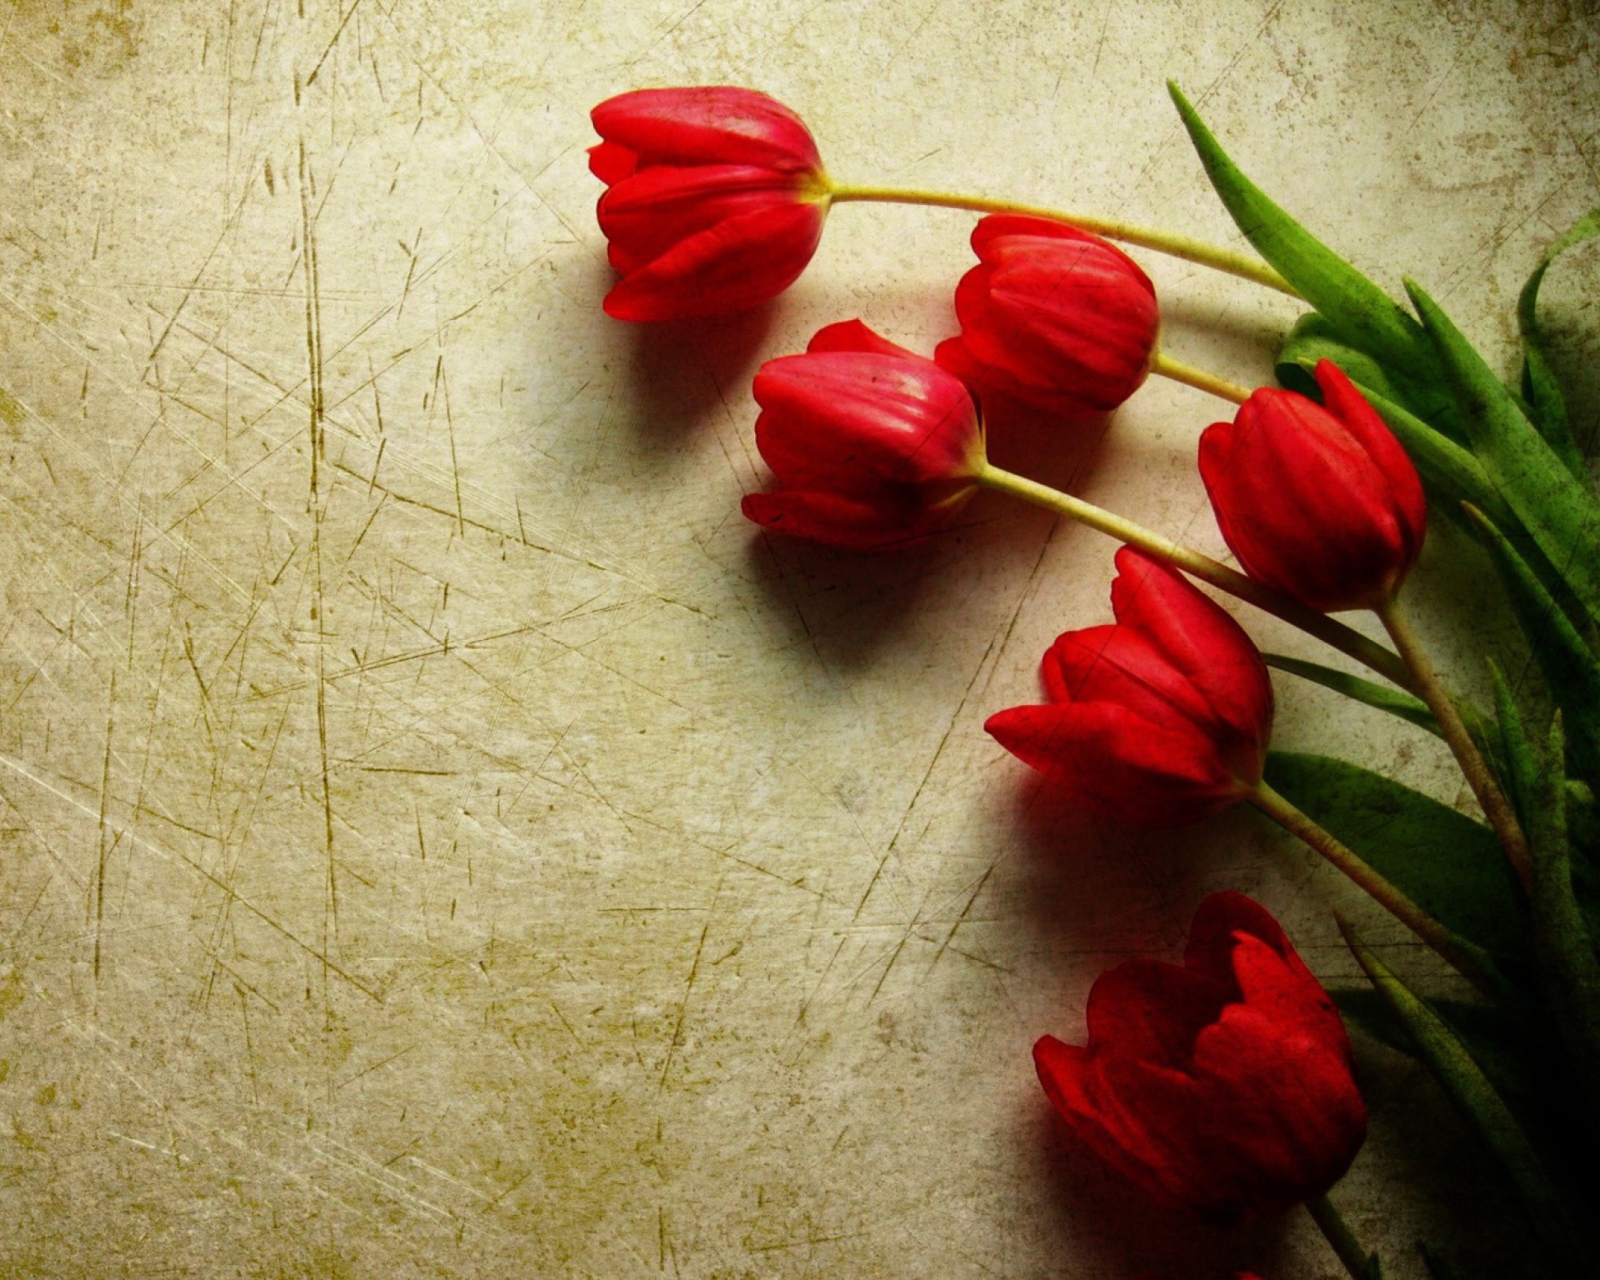 Red Tulips wallpaper 1600x1280